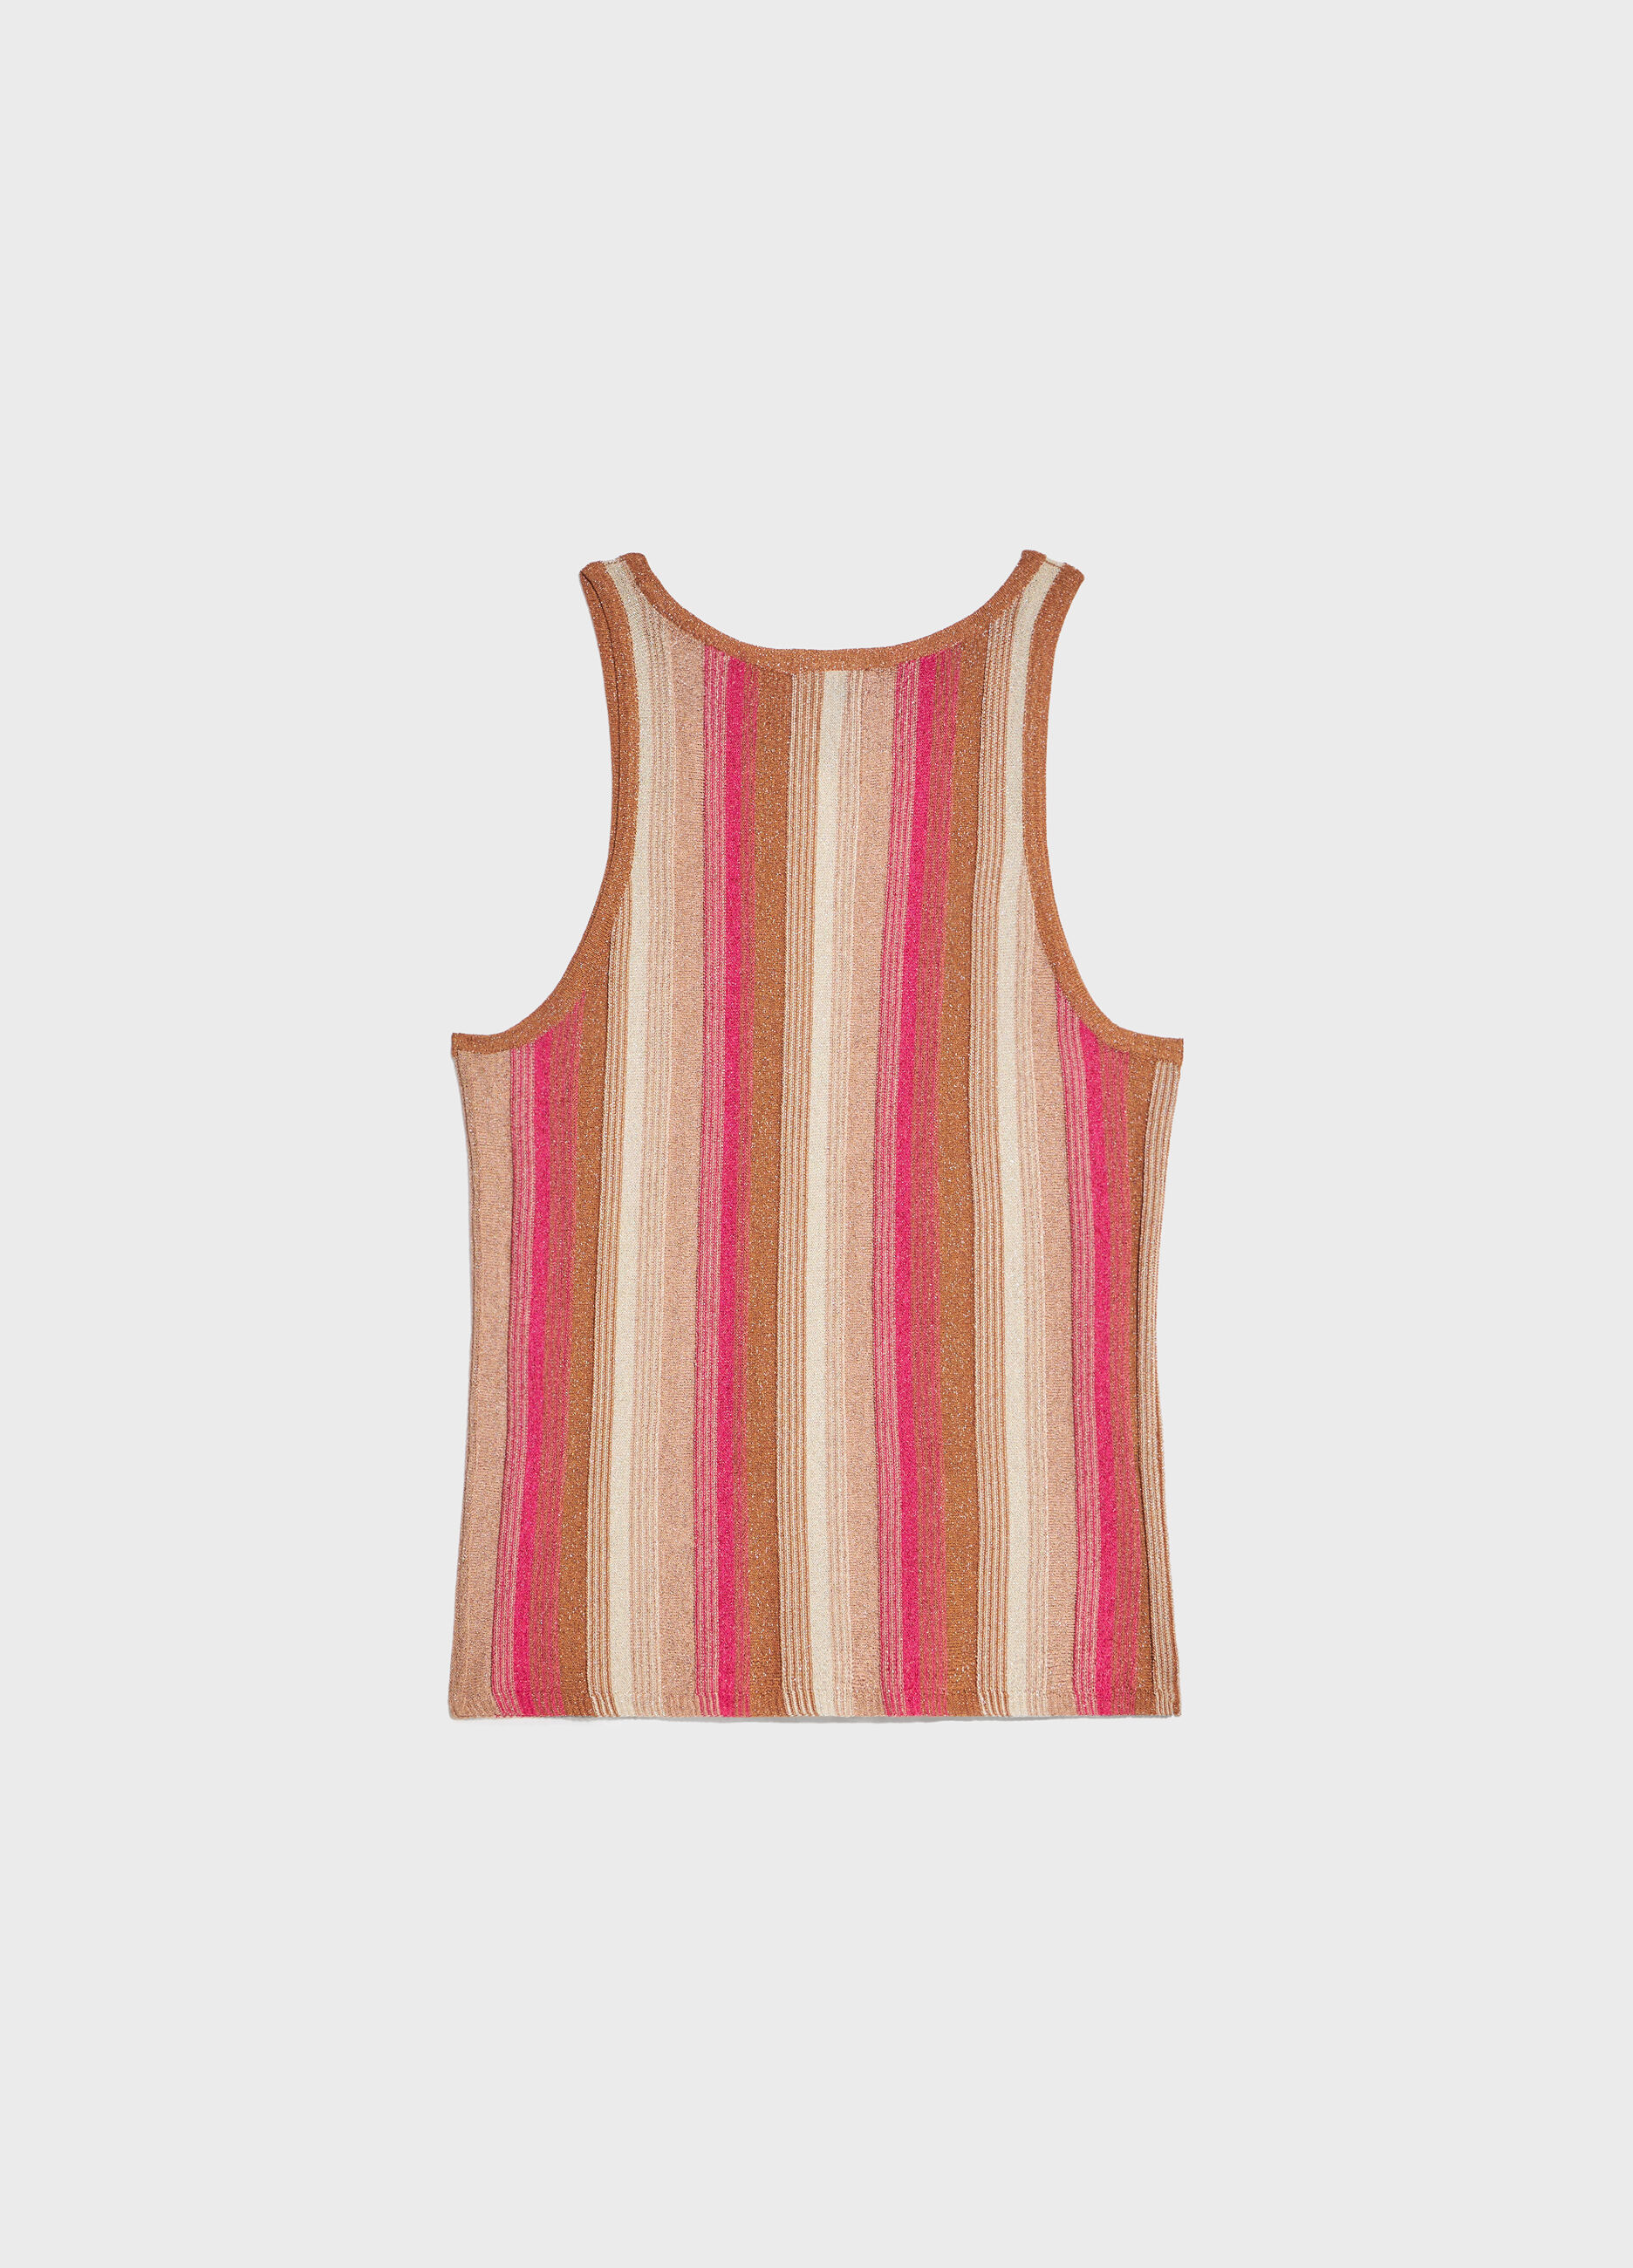 Pink and brown striped sleeveless top_5